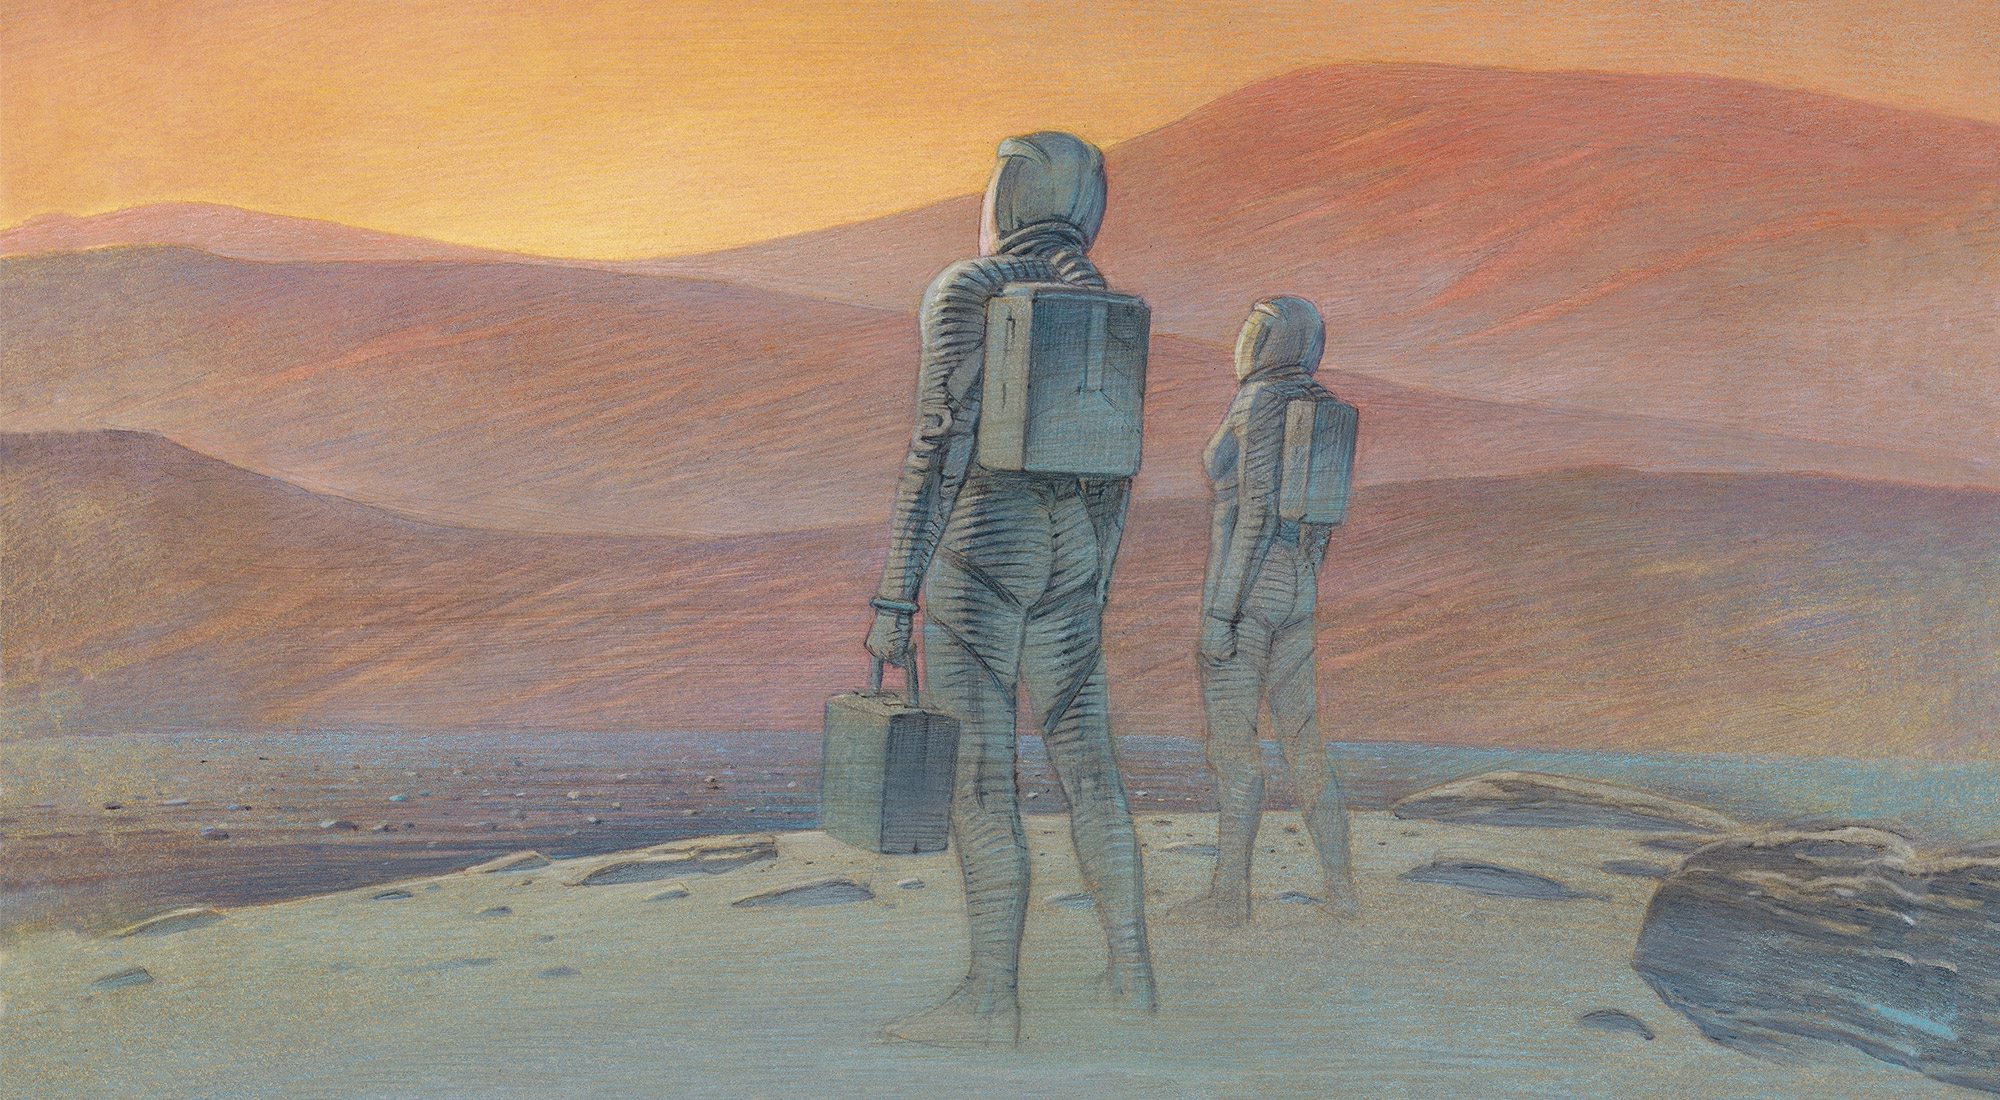 Voyage to Mars with Francois Schuiten and Sylvain Tesson, a new jewel joins  Louis Vuitton travel book collection - LVMH